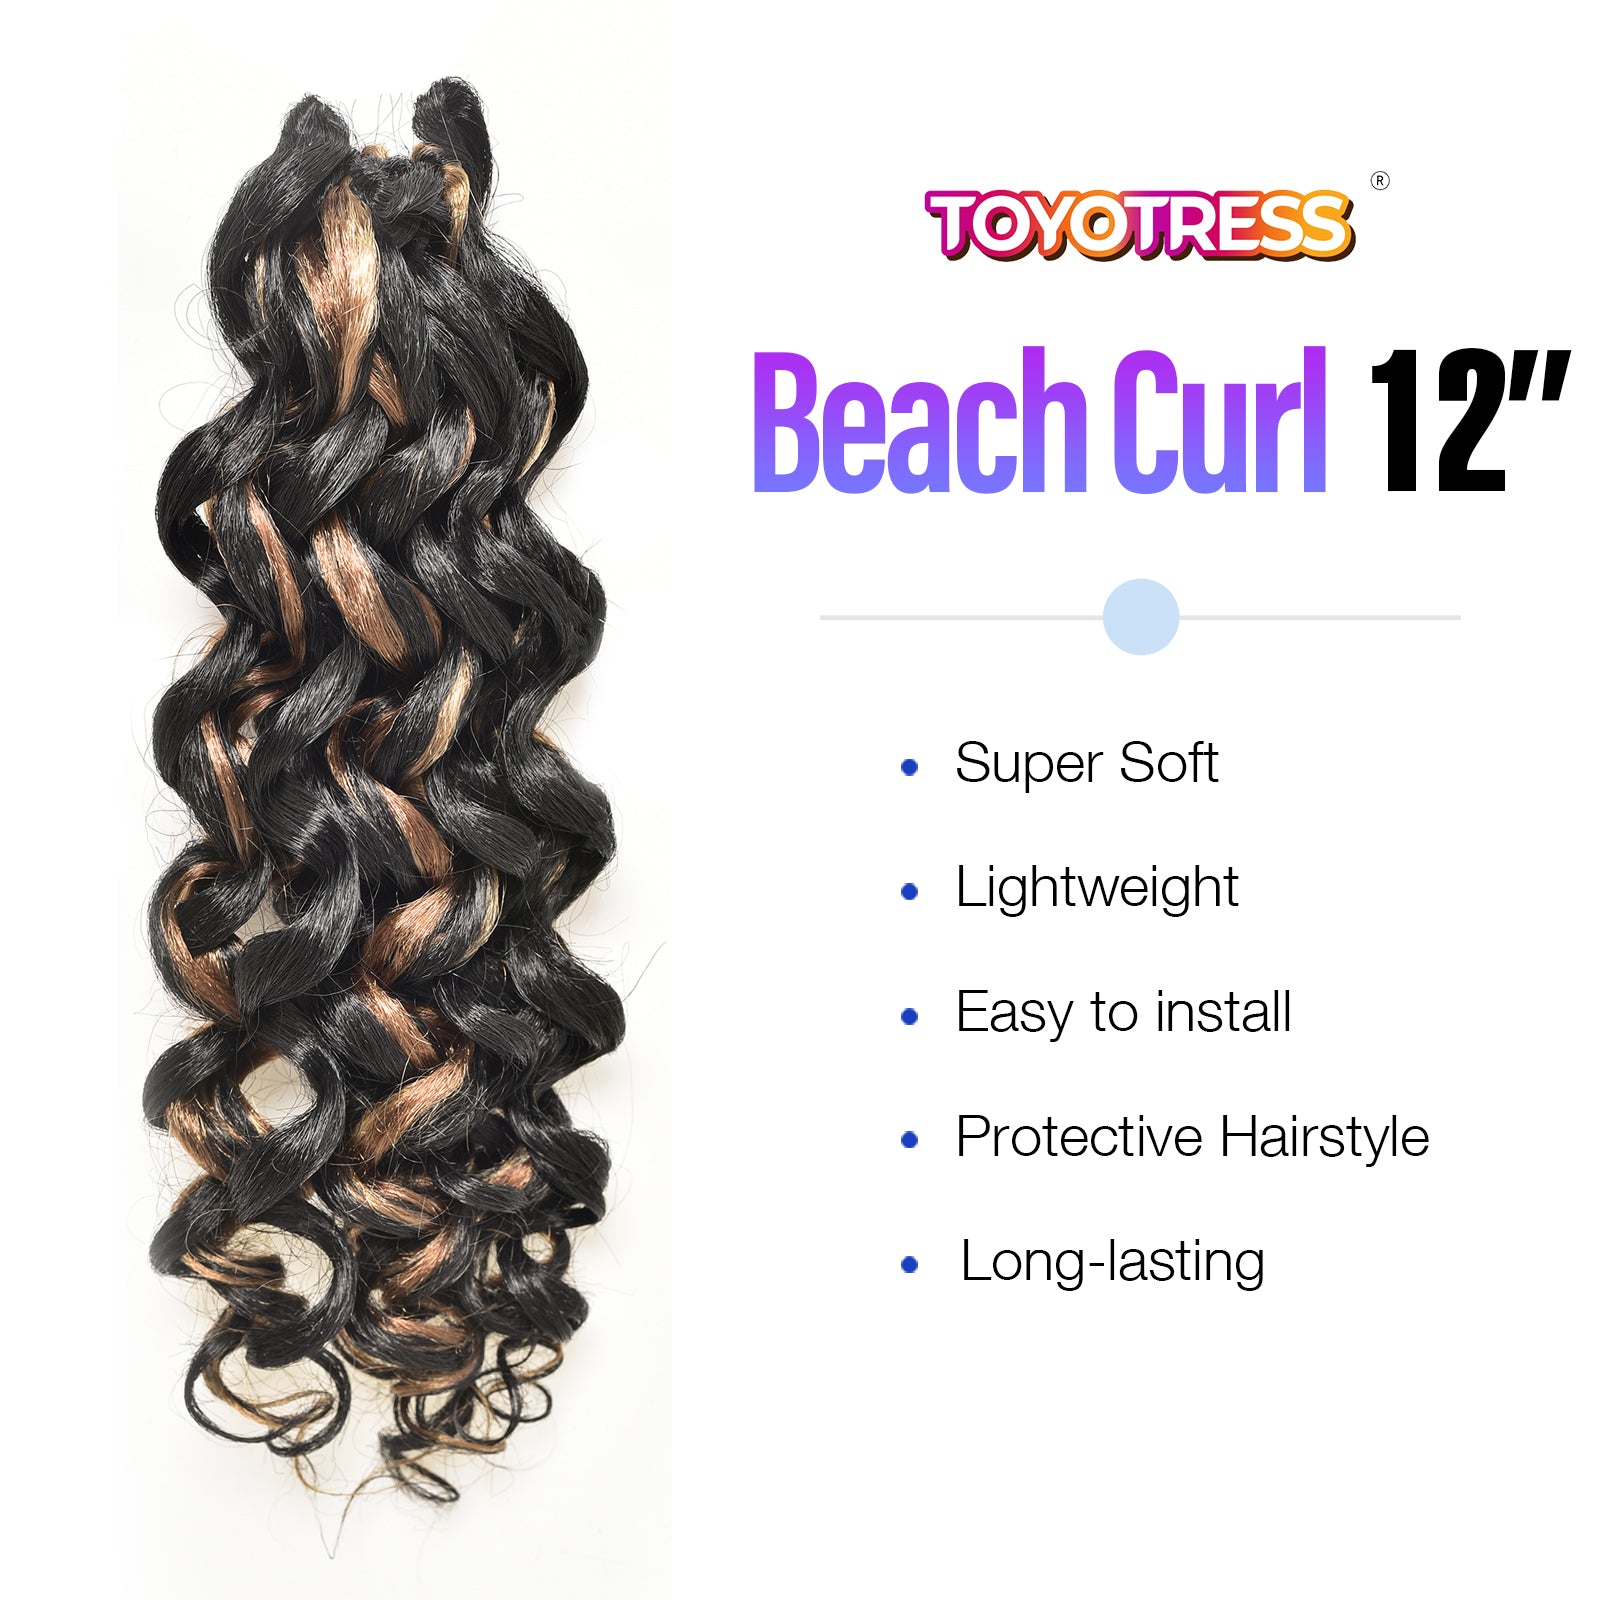 Gogo Curl Crochet Hair 8 packs | CoCo Curl Jamaican Bounce Wavy Curly Pre-Looped Synthetic Hair